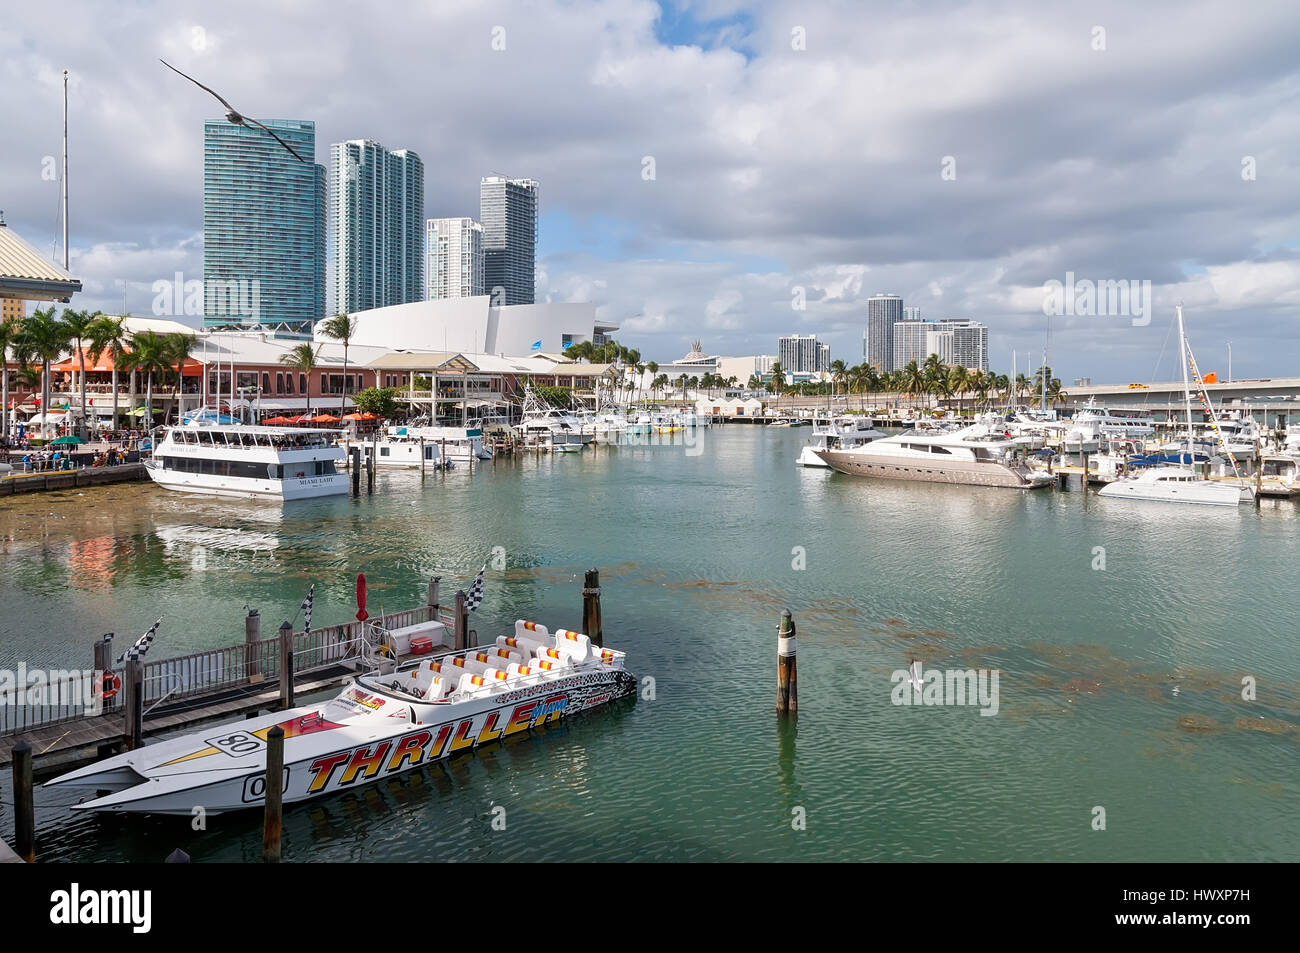 Miami, USA - November 25, 2011: Bayside Entertainment Market Place and Marina on a nice warm autumn day with the American Airlines Arena in the backgr Stock Photo